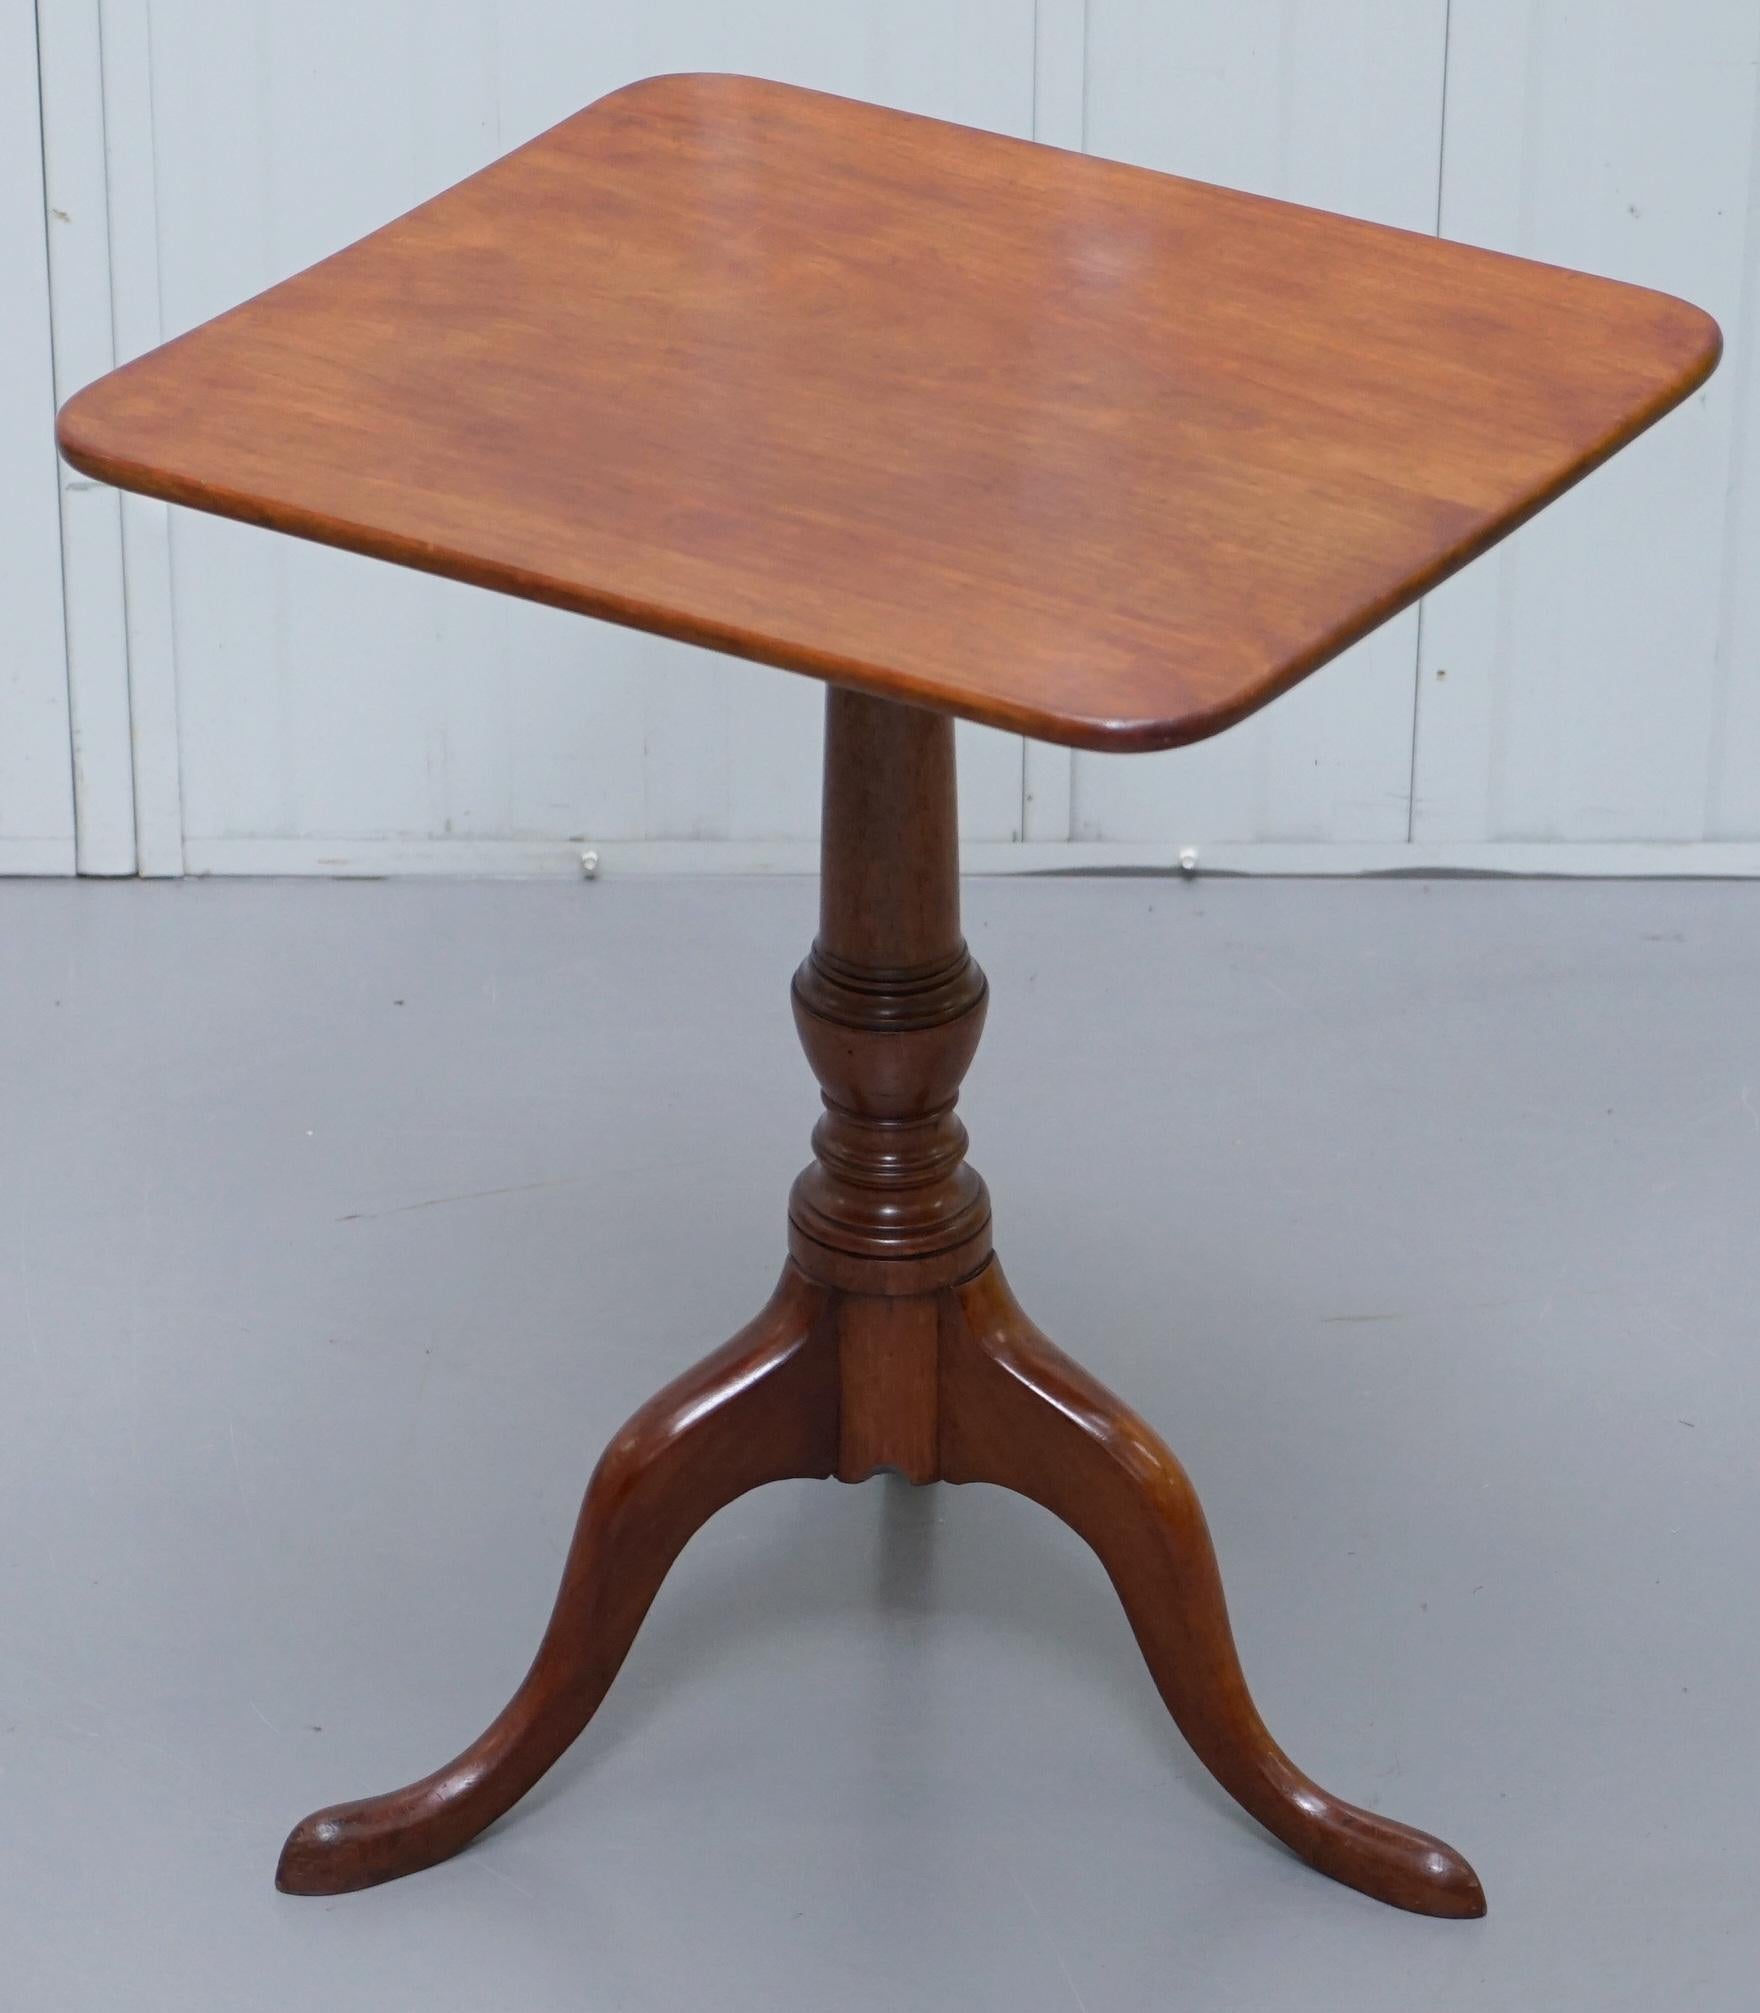 Victorian Tripod Side End Lamp Table in Walnut with Tilt Top Function circa 1860 2